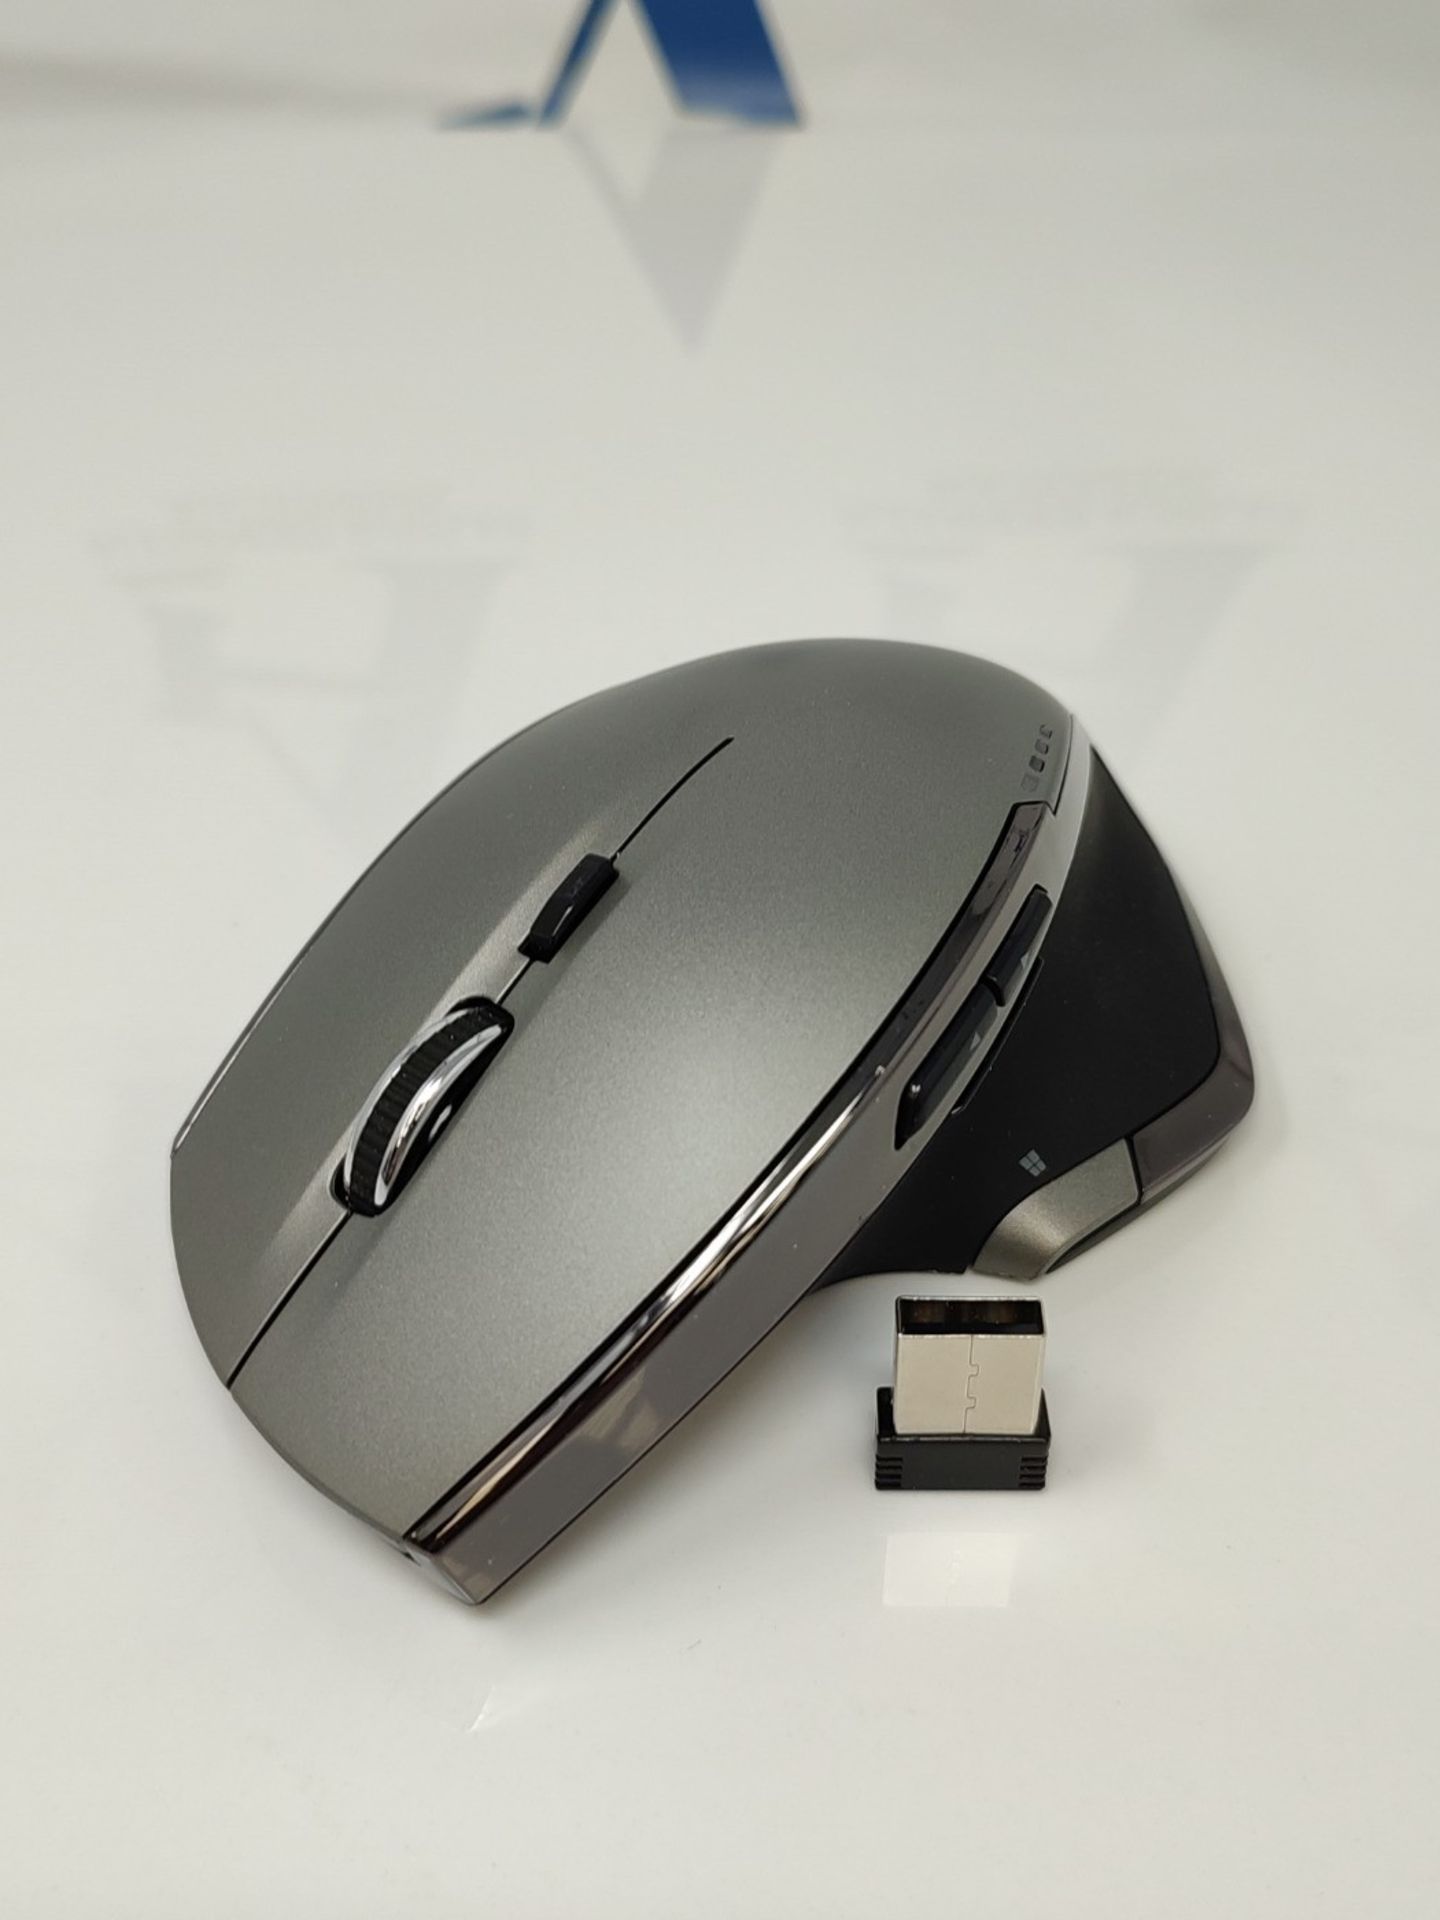 Verbatim Wireless Computer Mouse, wireless mouse with 8 buttons, wireless mouse for la - Image 3 of 3